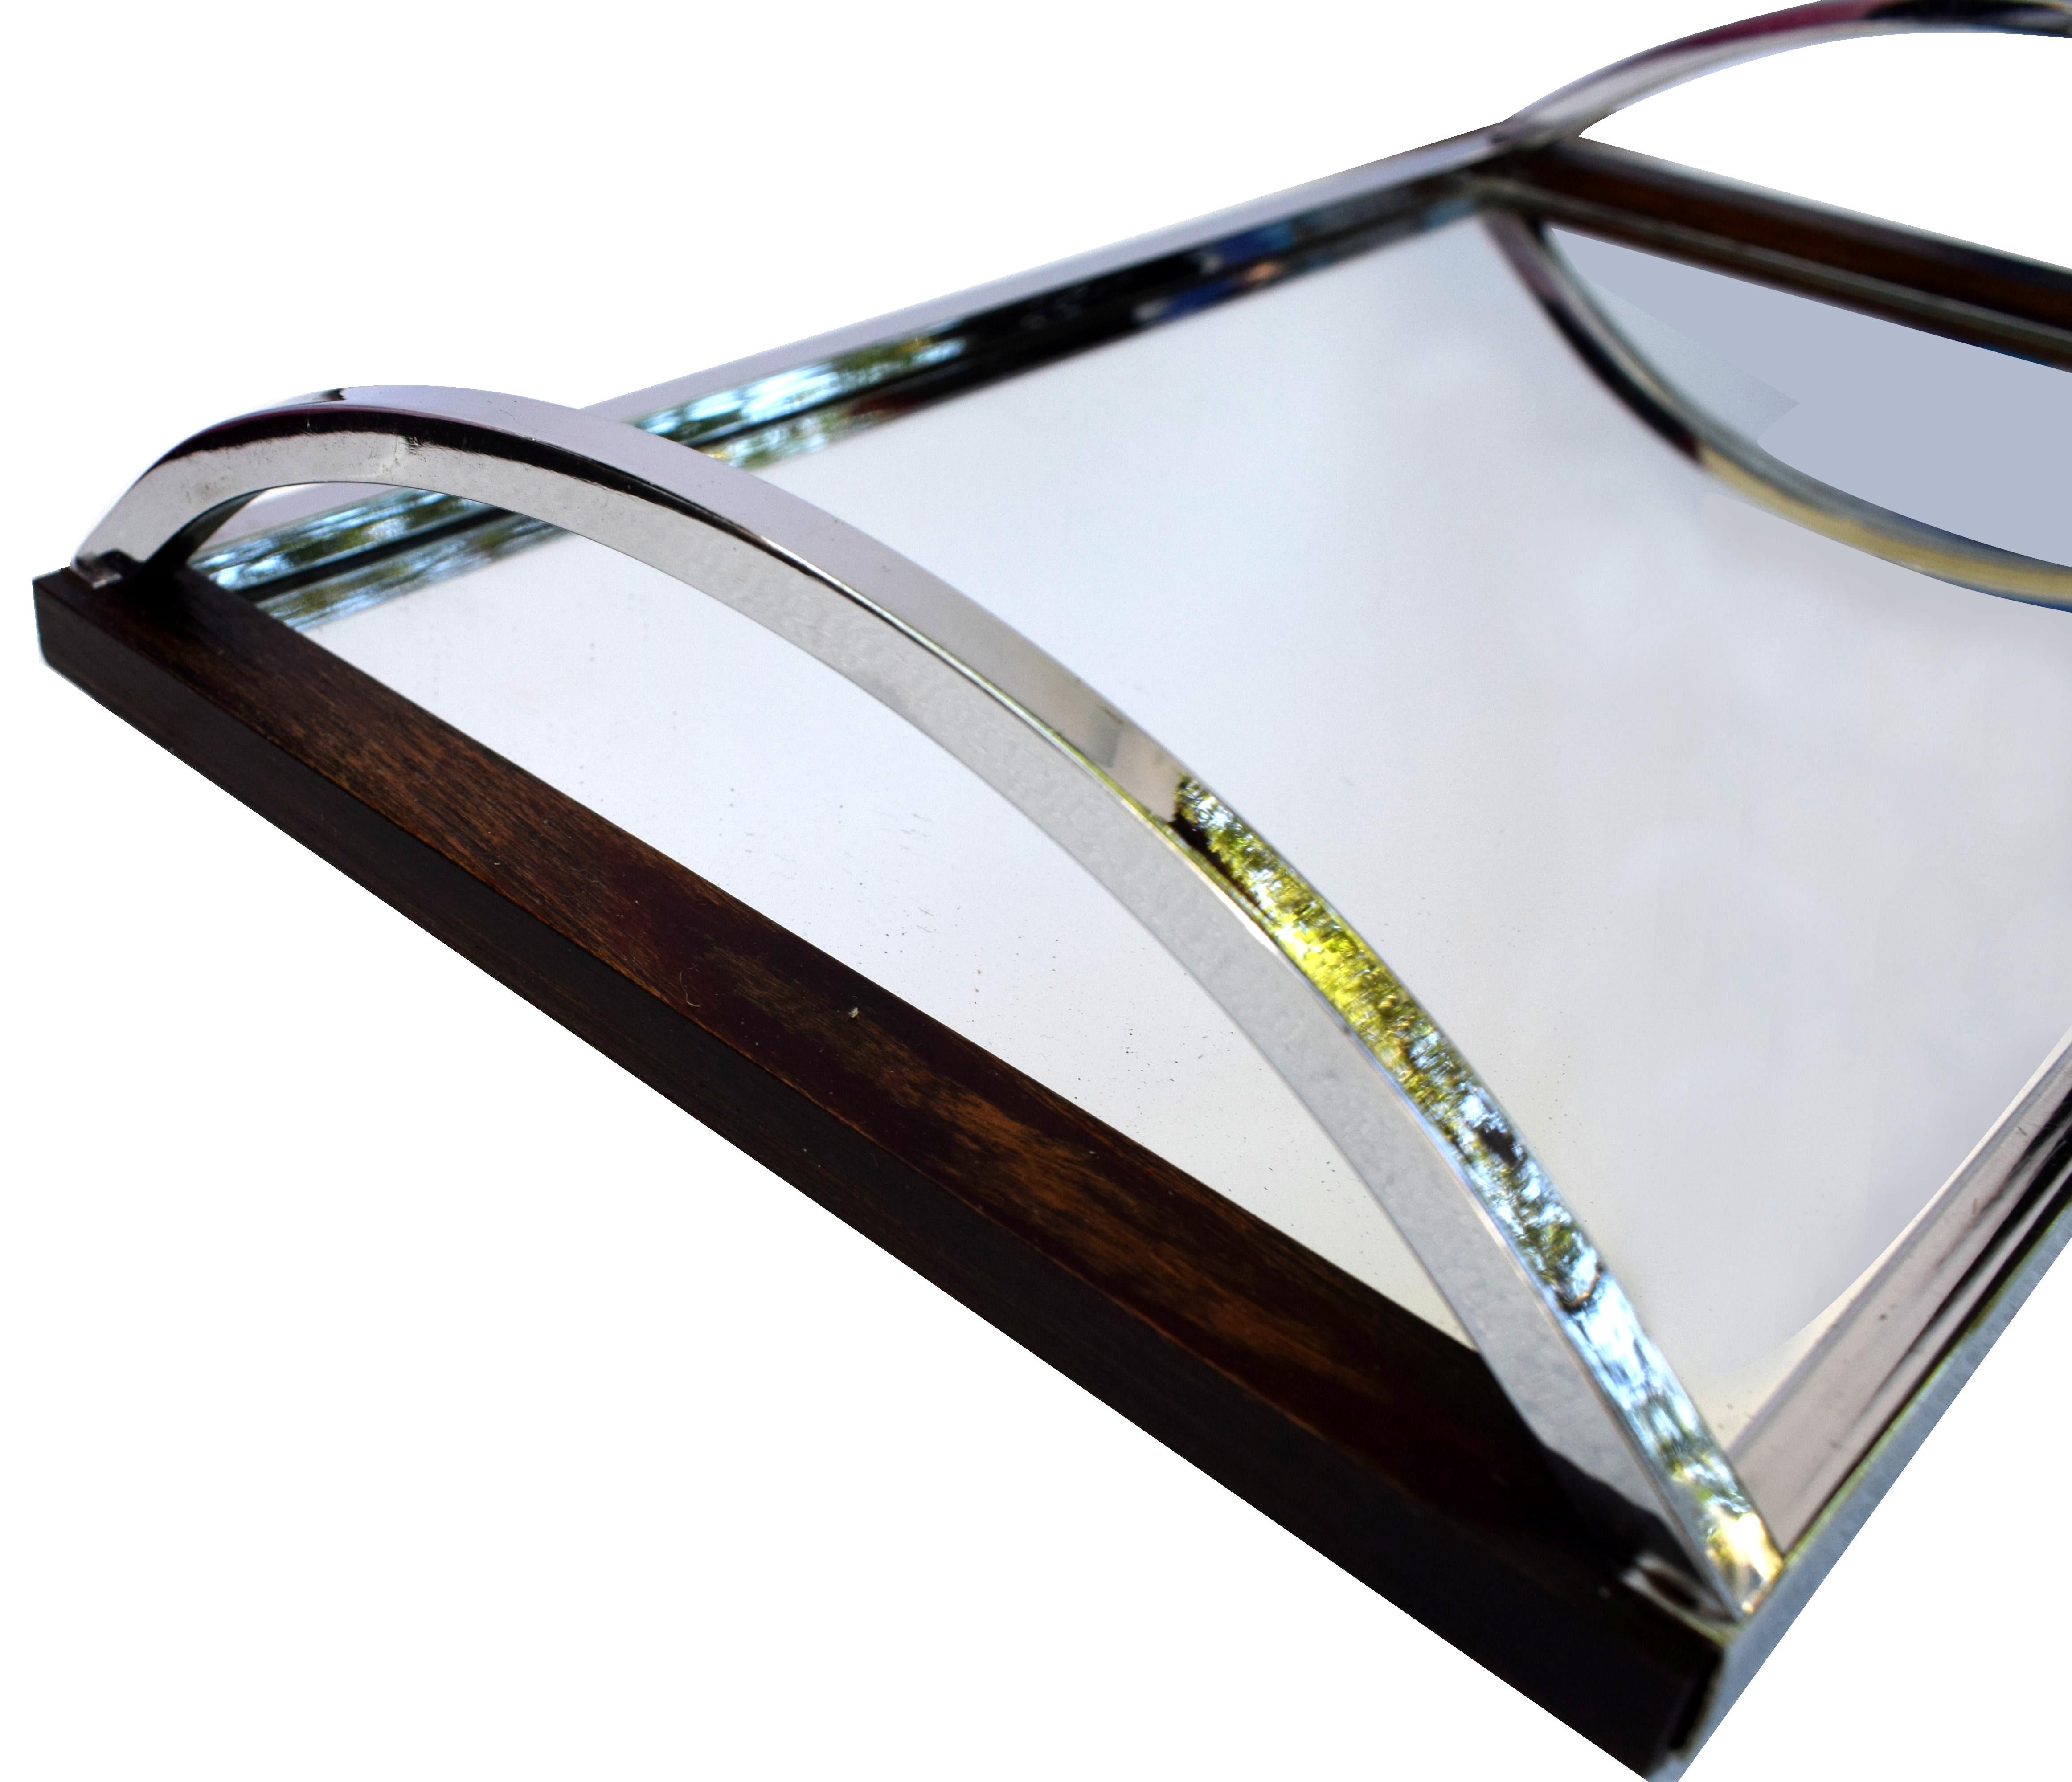 1930s Art Deco tray with a fully chromed frame with walnut accent trim. Arching chrome handles support the all mirror base. In great condition for a utility piece and something special to add that extra glam to serving drinks. These trays are ideal